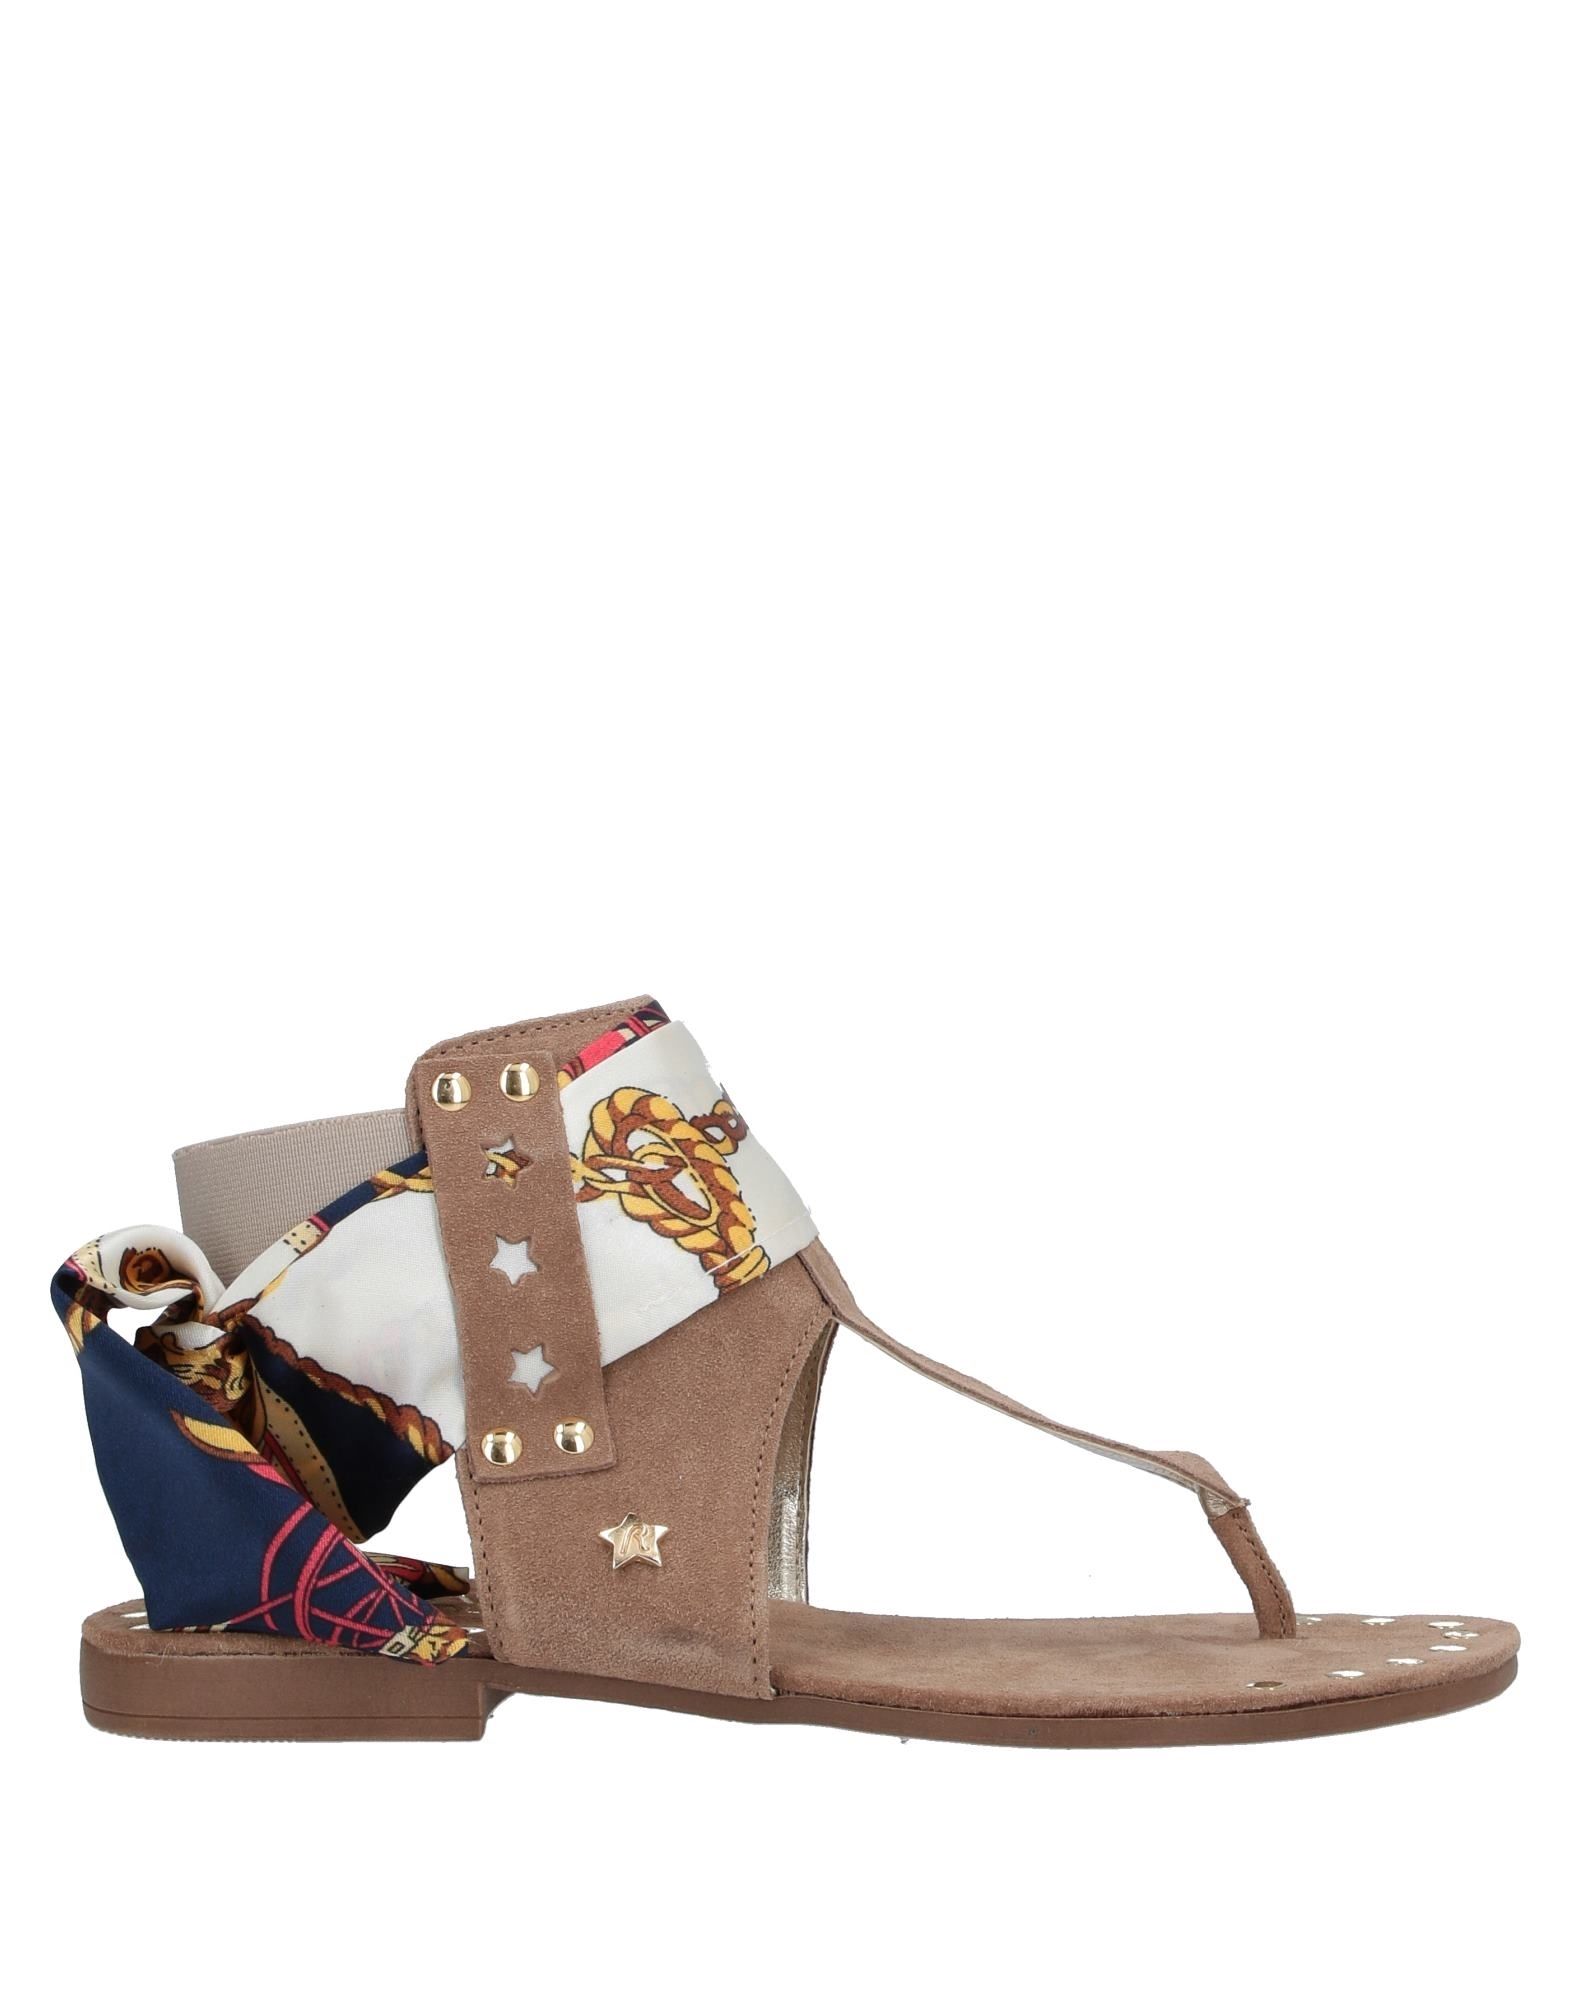 REPLAY Toe strap sandals